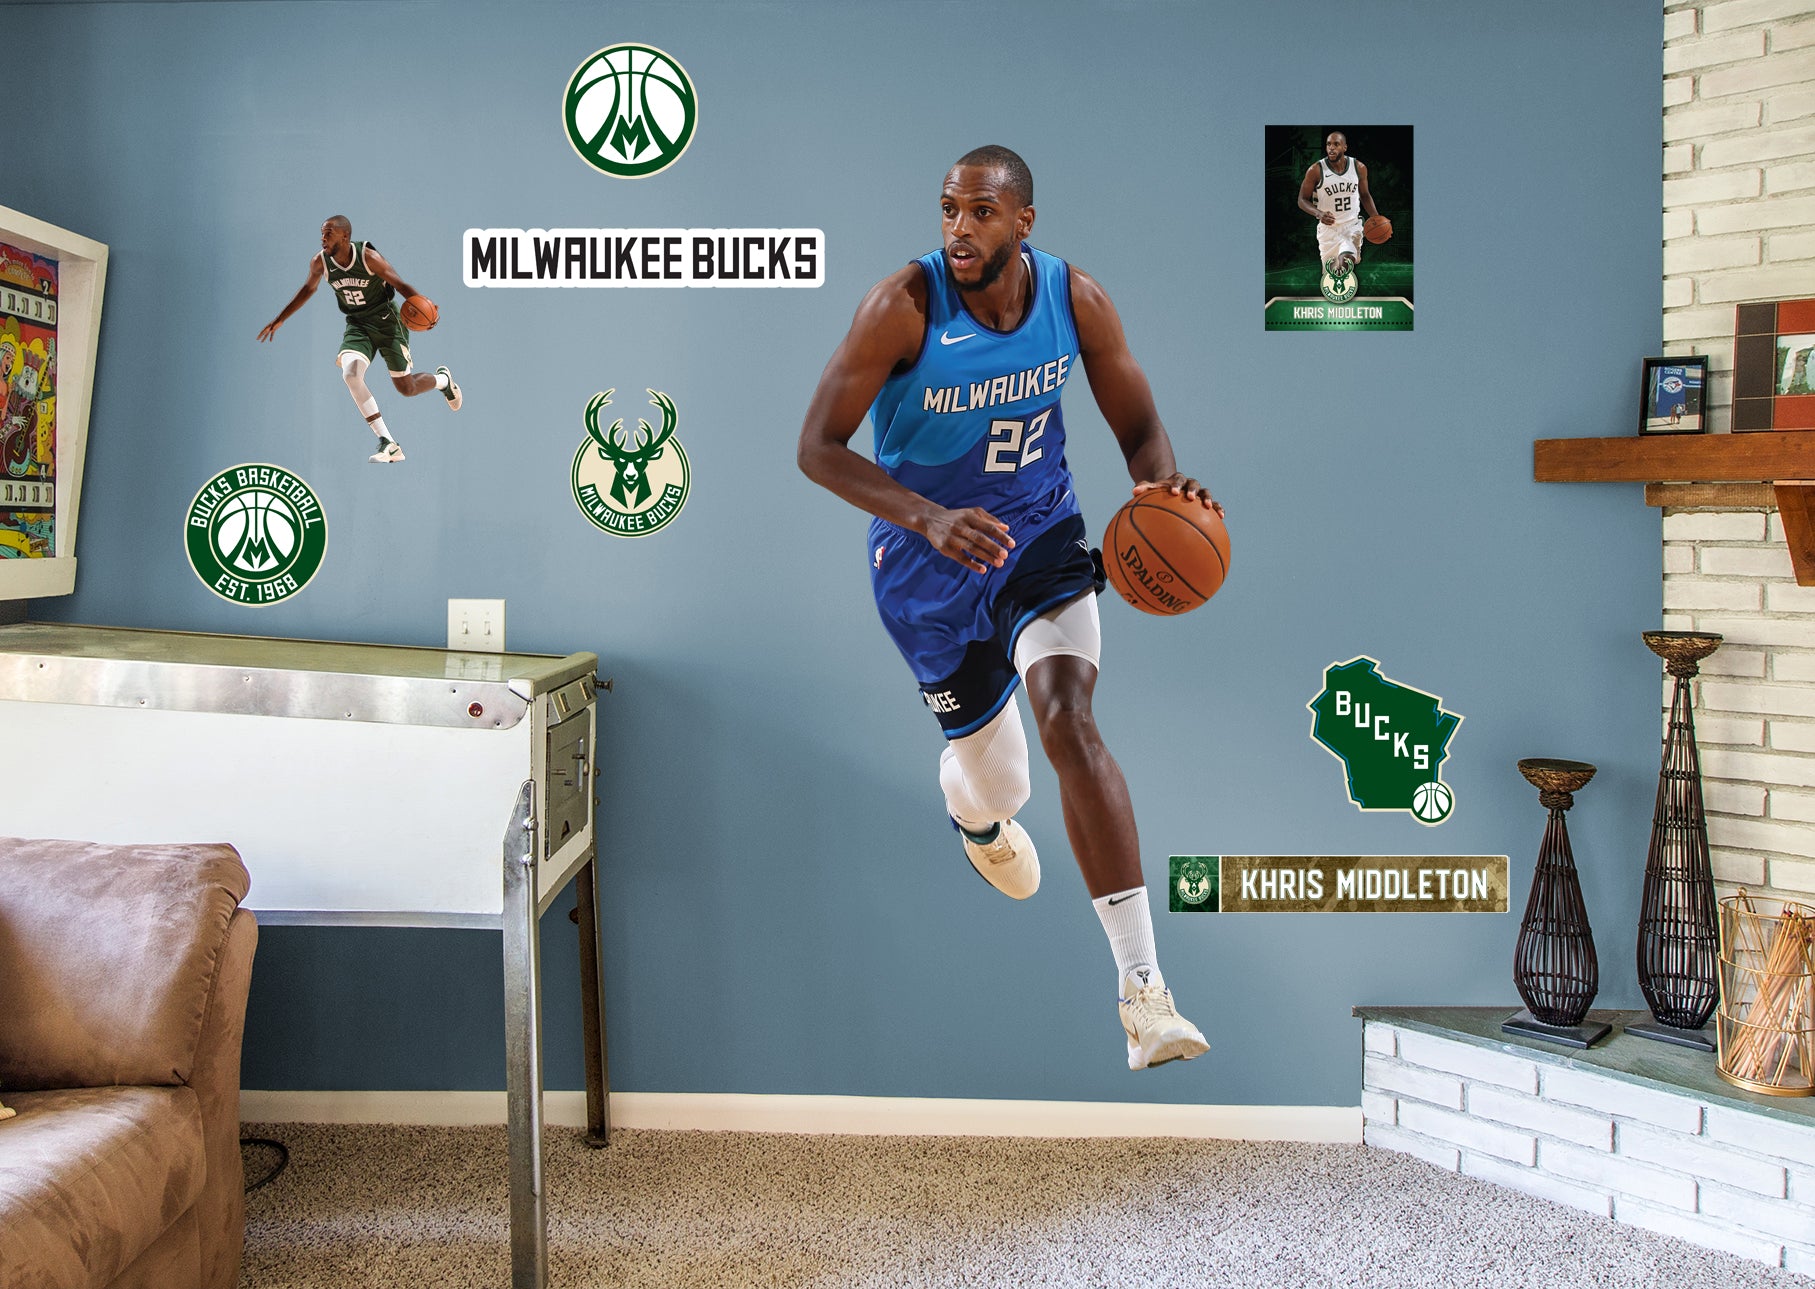 Khris Middleton 2021 Blue Jersey for Milwaukee Bucks - Officially Licensed NBA Removable Wall Decal Life-Size Athlete + 8 Decals